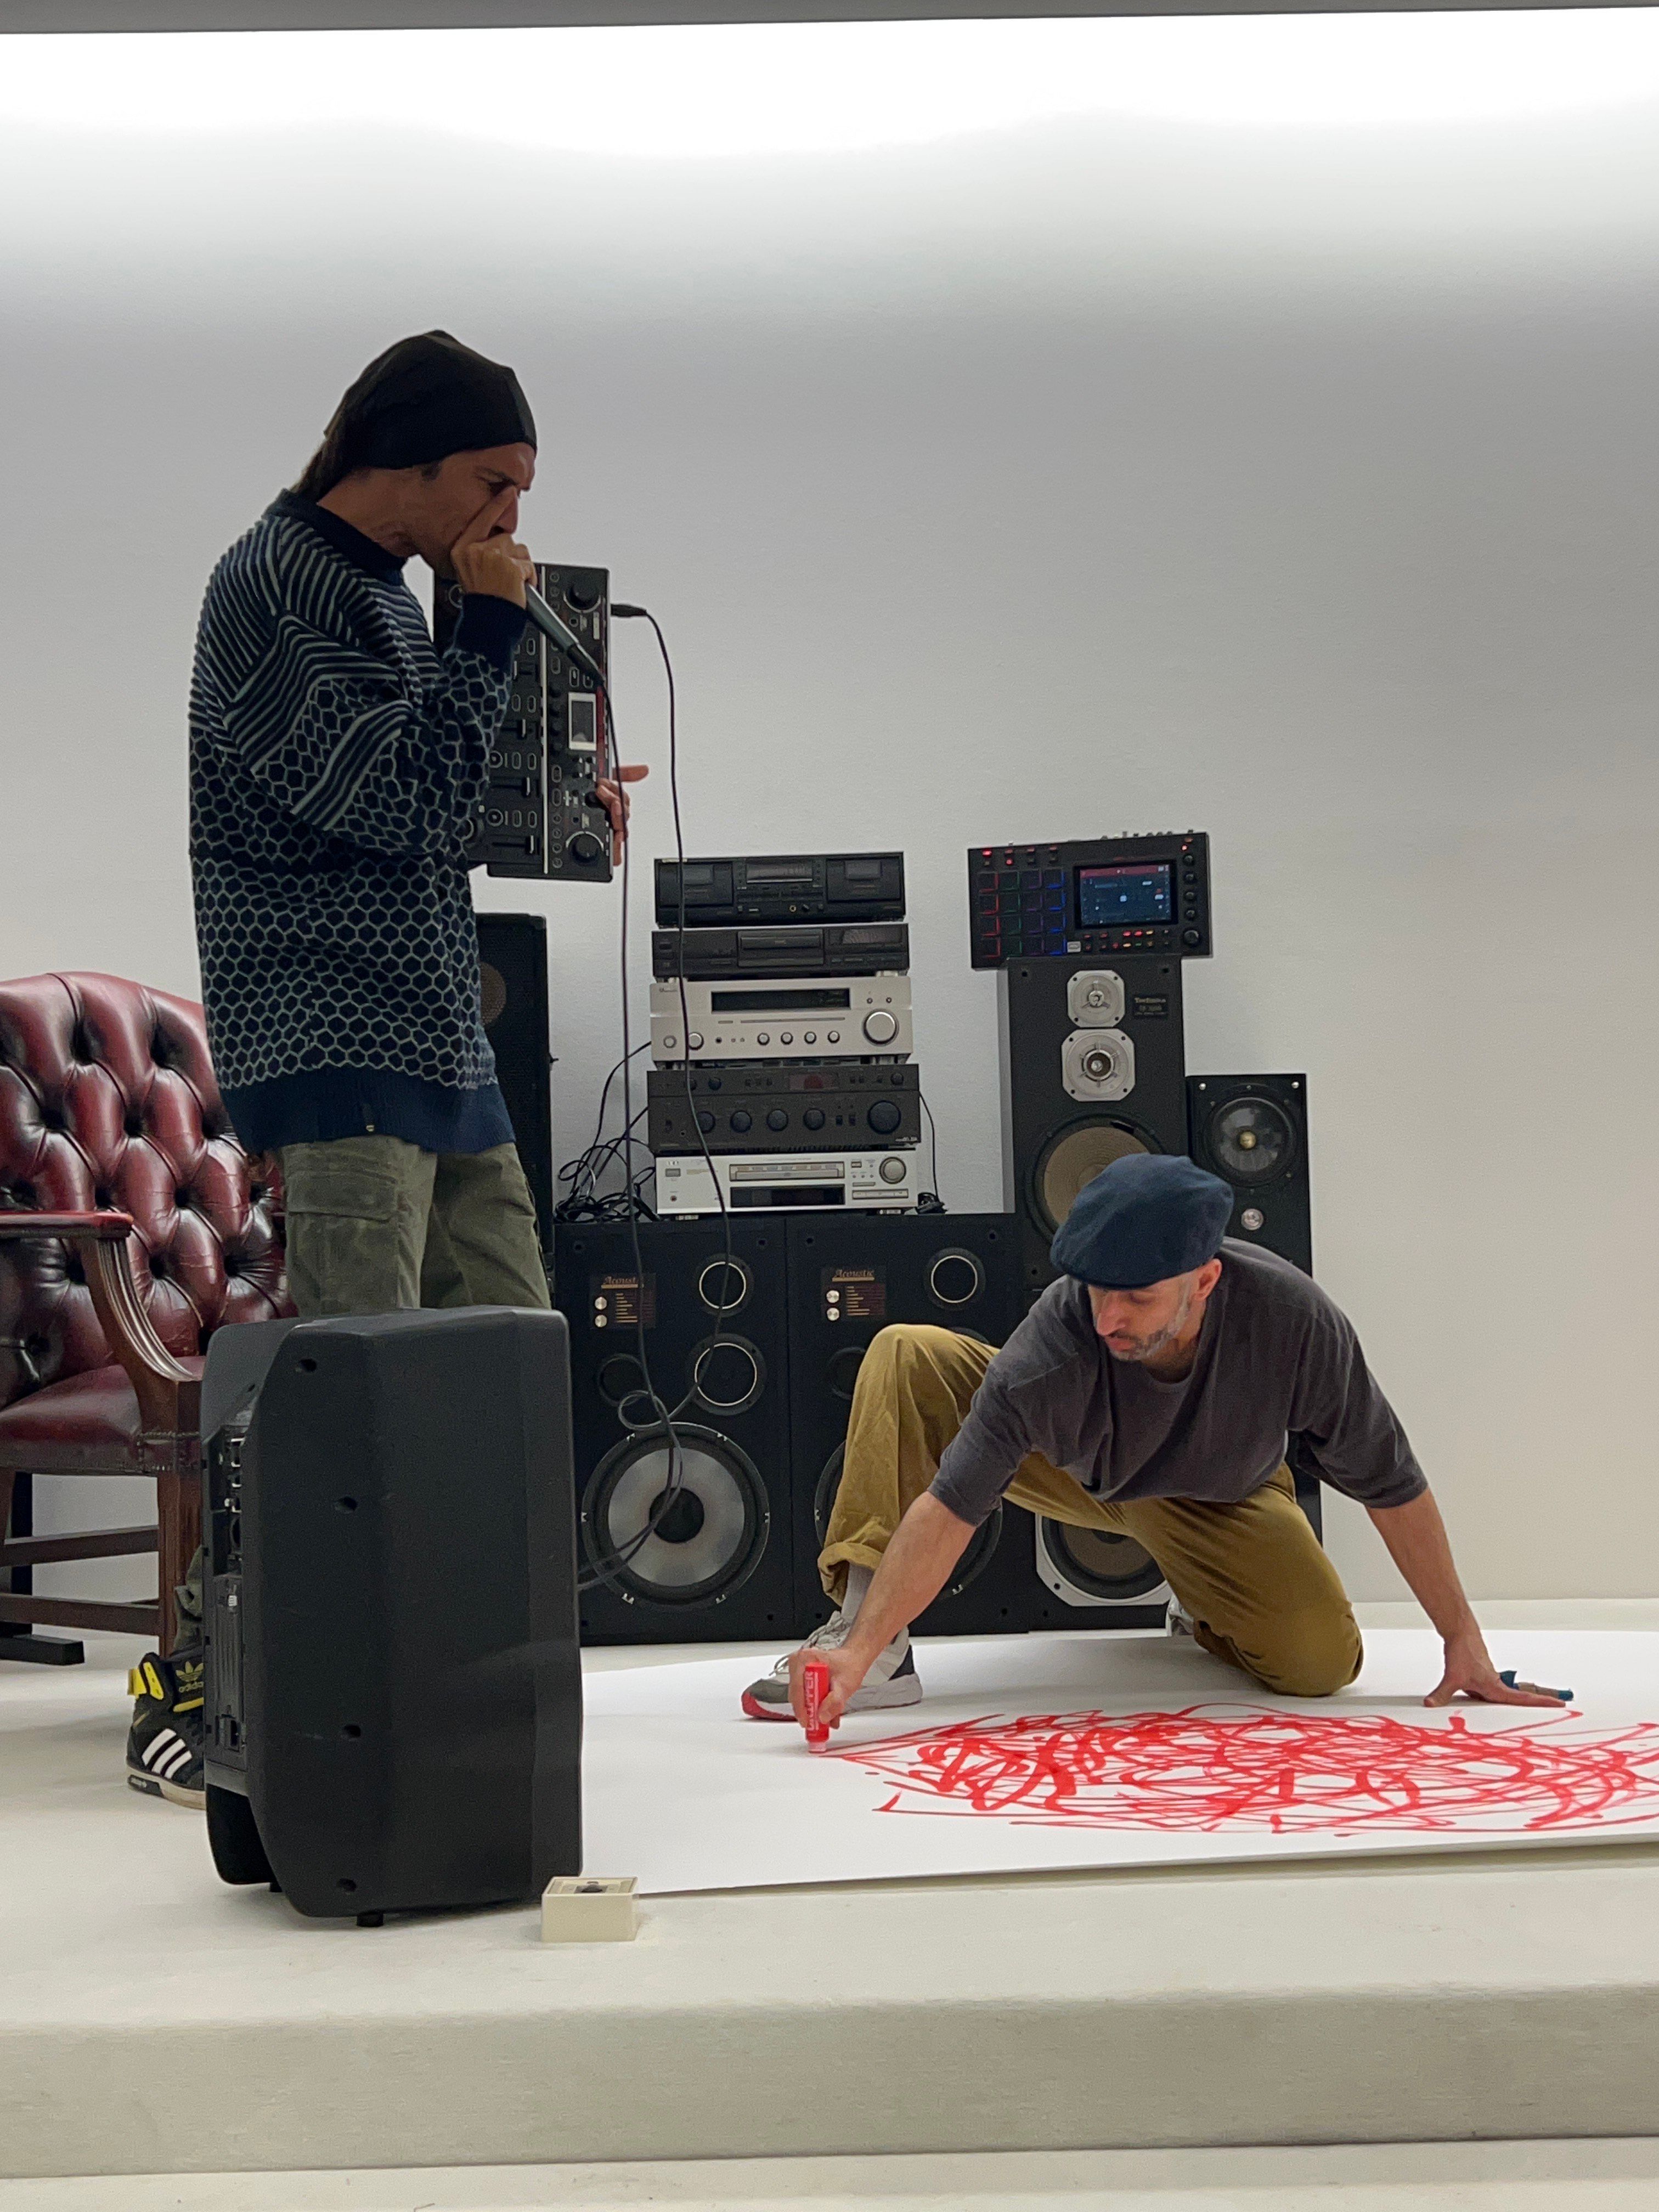 Two people can be seen in the picture. One person is standing and holding a microphone. The person is speaking into the microphone. The other person kneels on the floor and draws something on paper with a red marker.